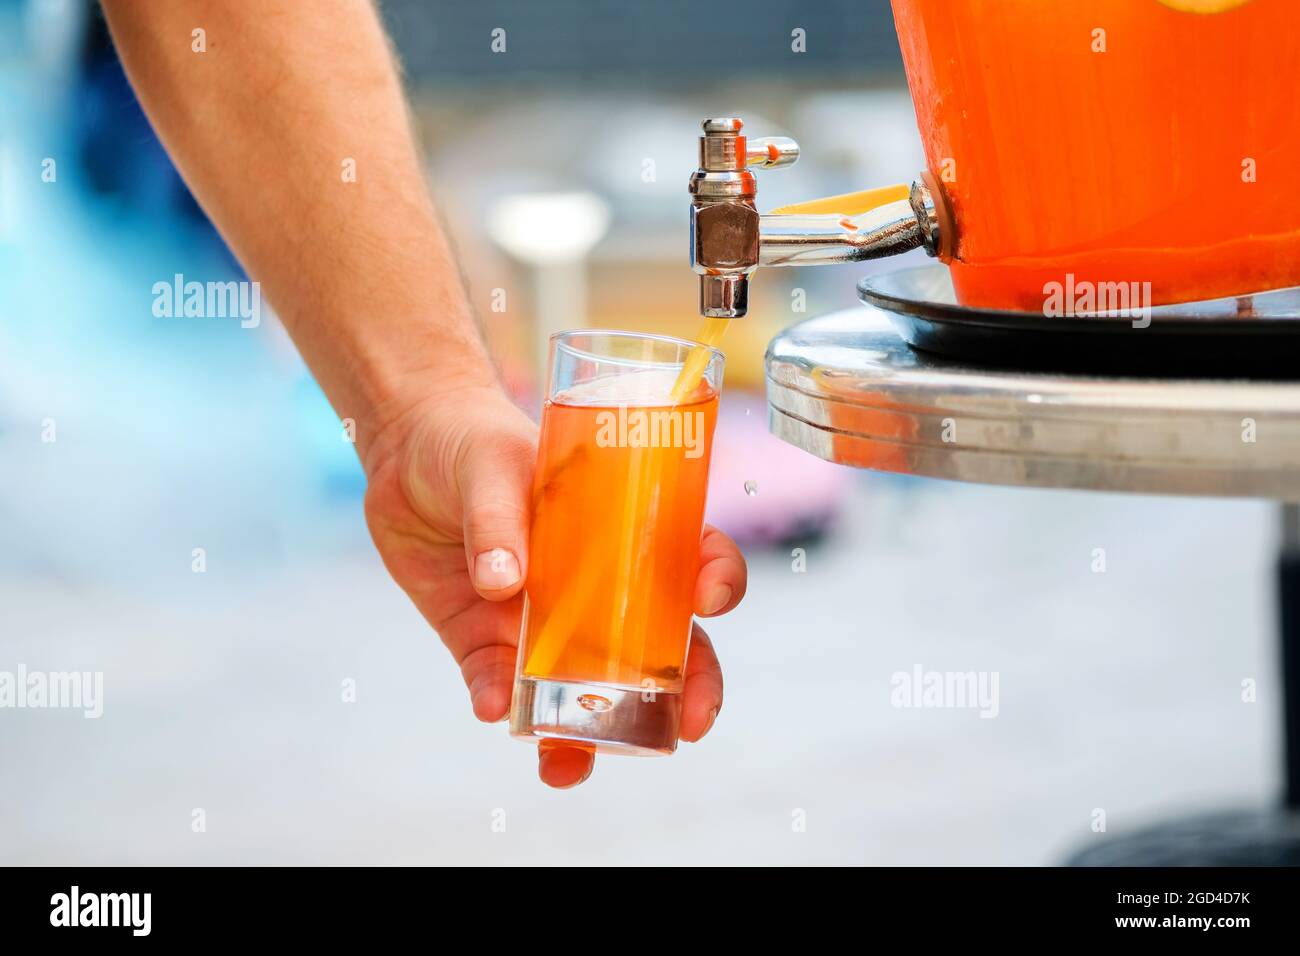 https://c8.alamy.com/comp/2GD4D7K/man-hand-pouring-fresh-sorbet-fruit-juice-or-alcohol-punch-from-drinking-tank-machine-at-party-2GD4D7K.jpg